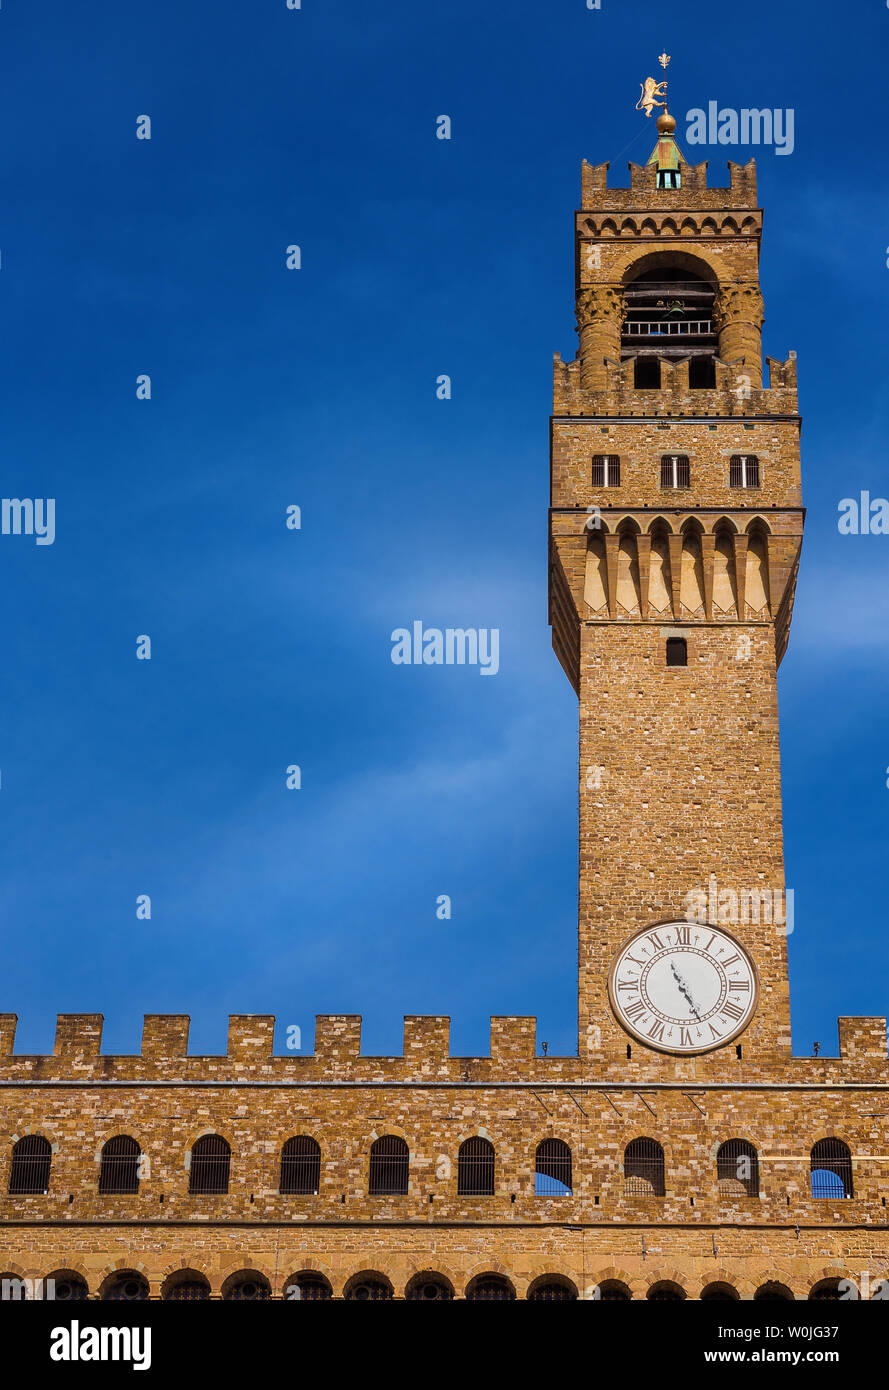 Palazzo Vecchio (Old Palace), the beautiful Florence town hall erected in the 14th century and  designed by the famous medieval architect Arnolfo di C Stock Photo